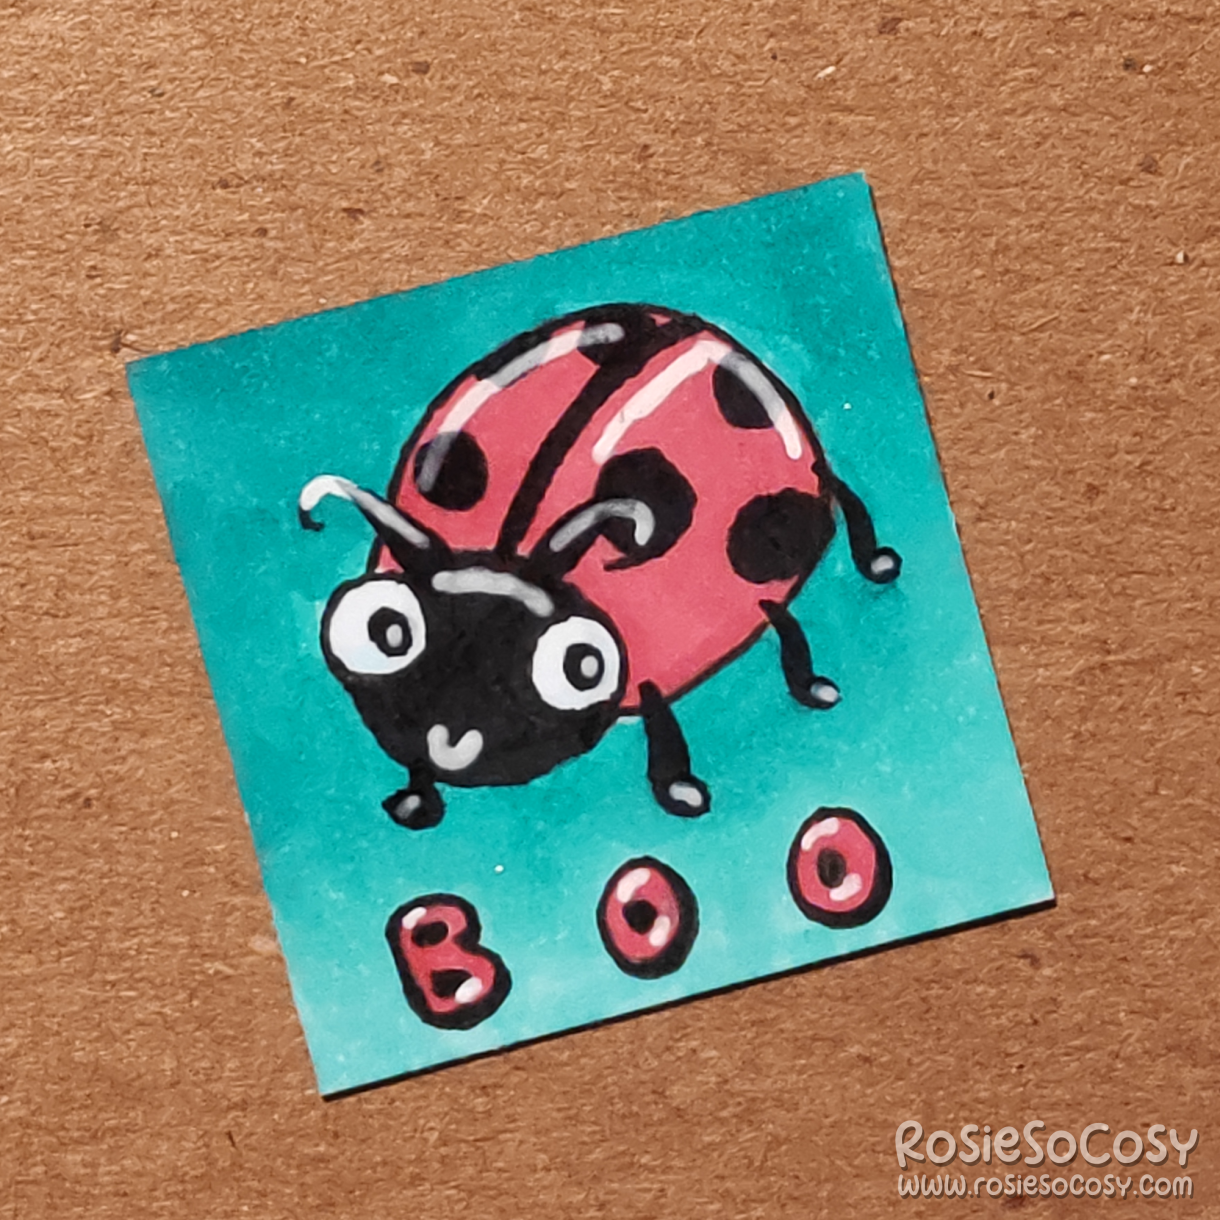 An inch sized drawing of a cute red and black ladybug. Underneath the drawing it says "boo" on a turquoise dark to light gradient background.